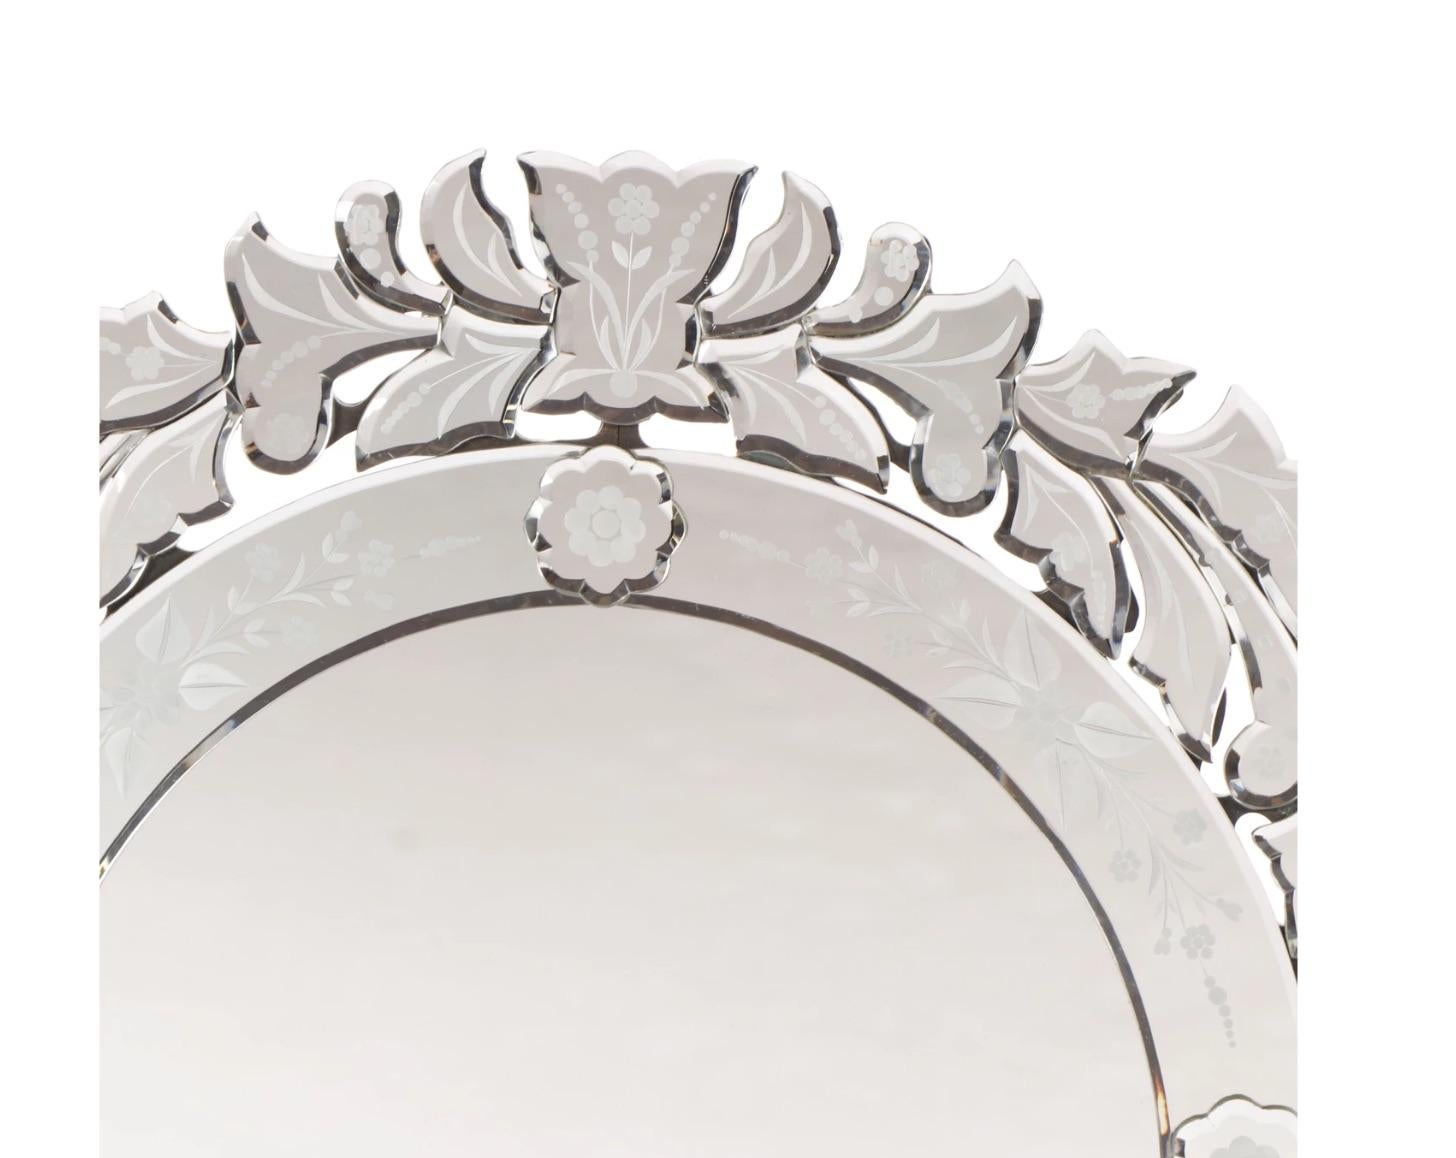 A very lovely Venetian style frameless 
Round mirror with a floral border-
Clear mirror with intricately wide cut-out 
scalloped edges all around with hand etched 
floral decoration, rosettes and floral etched inner 
trim decoration.
20th